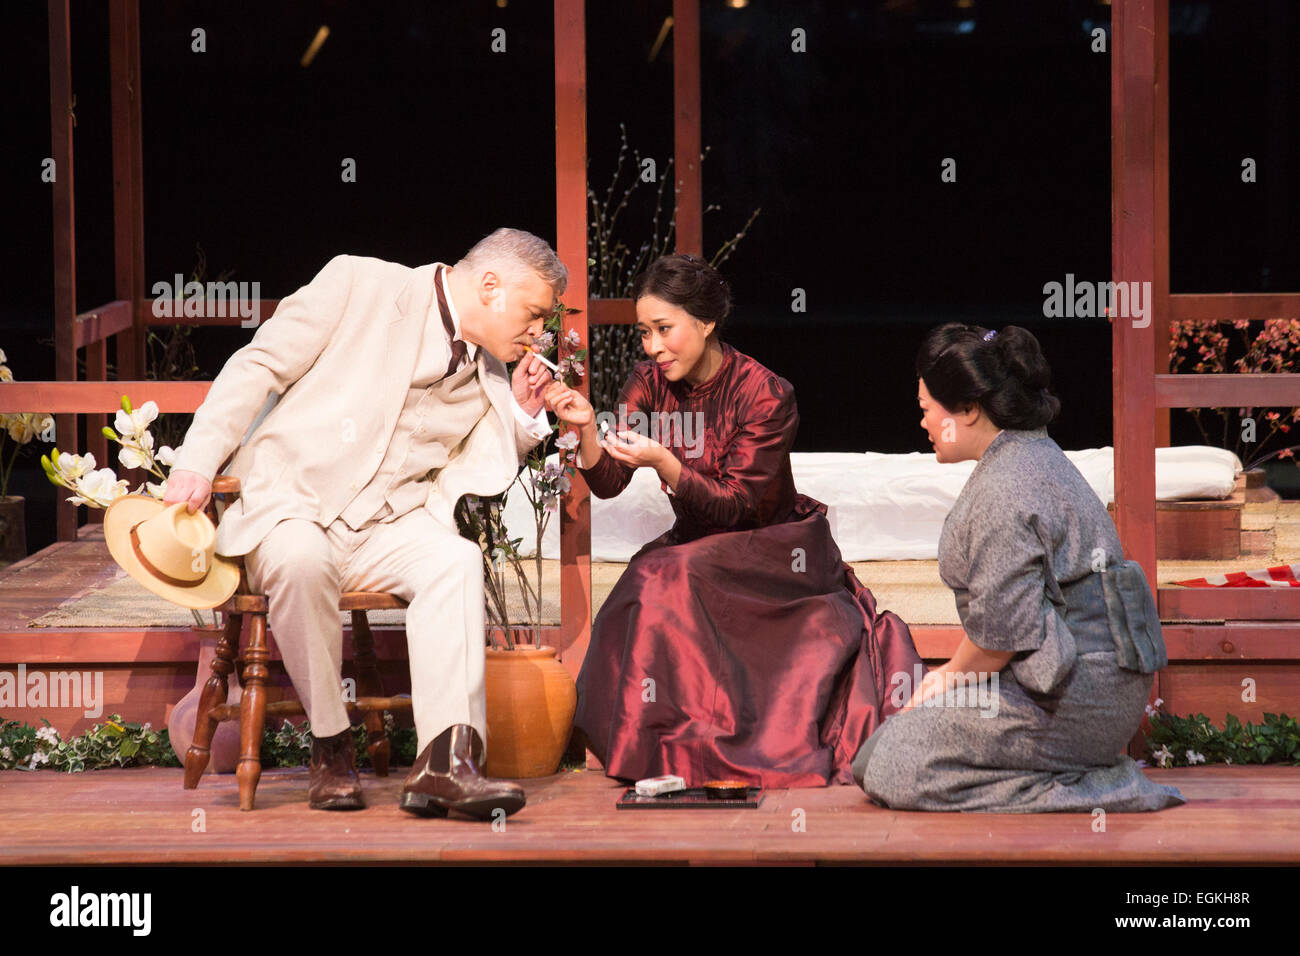 London, UK. 25 February 2015. L-R: David Kempster as Sharpless, Hyeseoung Kwon as Cio Cio San/Butterfly and Sabina Kim as Suzuki. Dress rehearsal of the Puccini opera 'Madam Butterfly', staged in the round of the Royal Albert Hall. The opera is performed from 26 February to 15 March 2015. Directed by David Freeman with Oliver Gooch conducting the Royal Philharmonic Orchestra. Cast includes: Hyeseoung Kwon as Cio Cio San/Butterfly, Jeffrey Gwaltney as Pinkerton, David Kempster as Sharpless, Sabina Kim as Suzuki, Michael Druiett as The Bonze, Julius Ahn as Goro and Lise Christensen as Kate Pinke Stock Photo